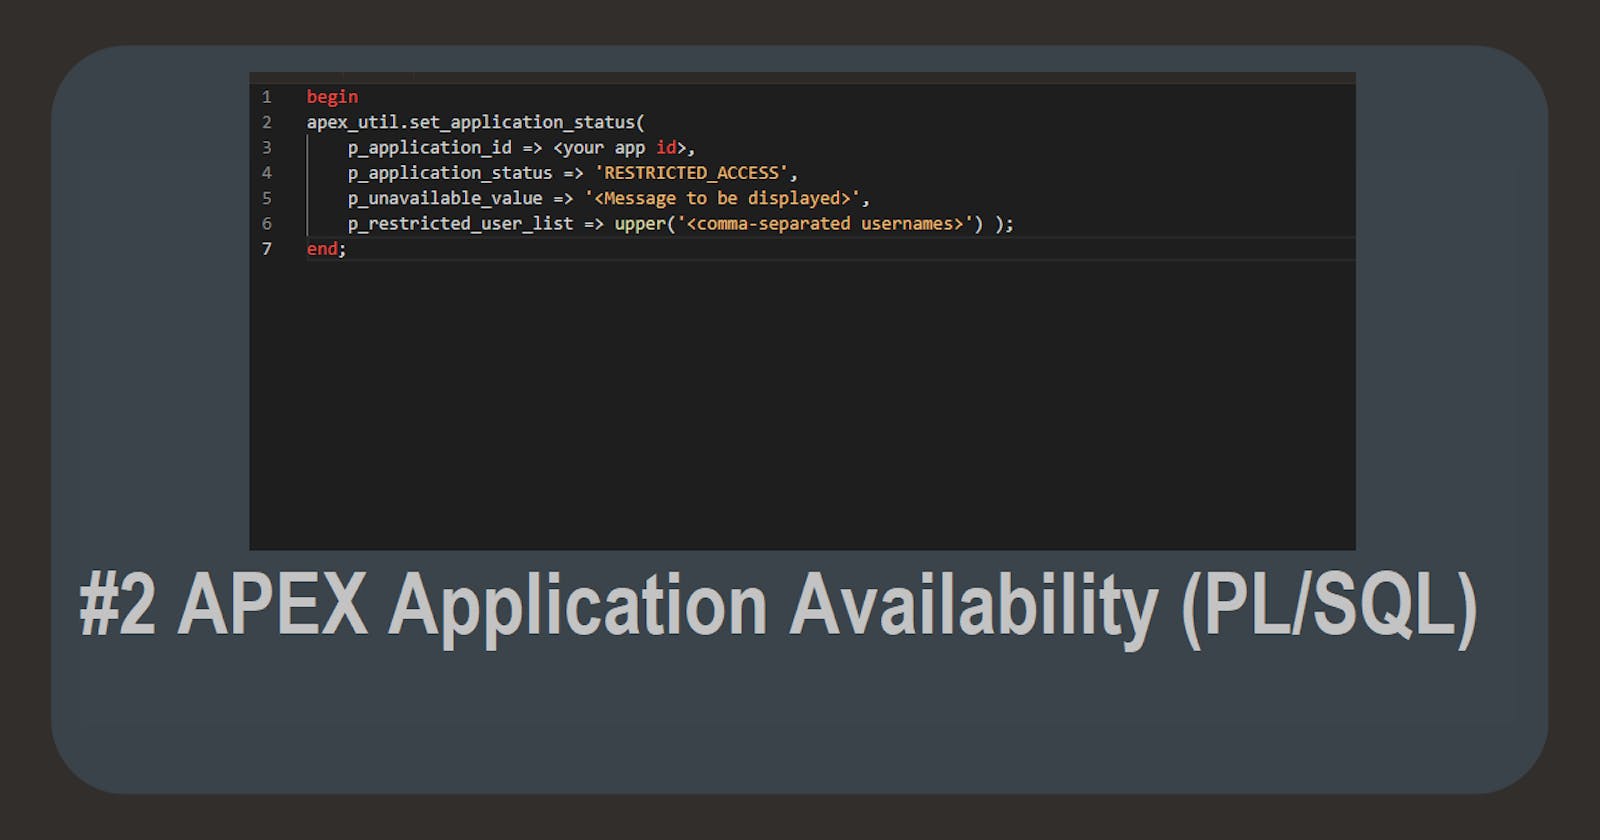 Tip#2 Application Availability using PL/SQL